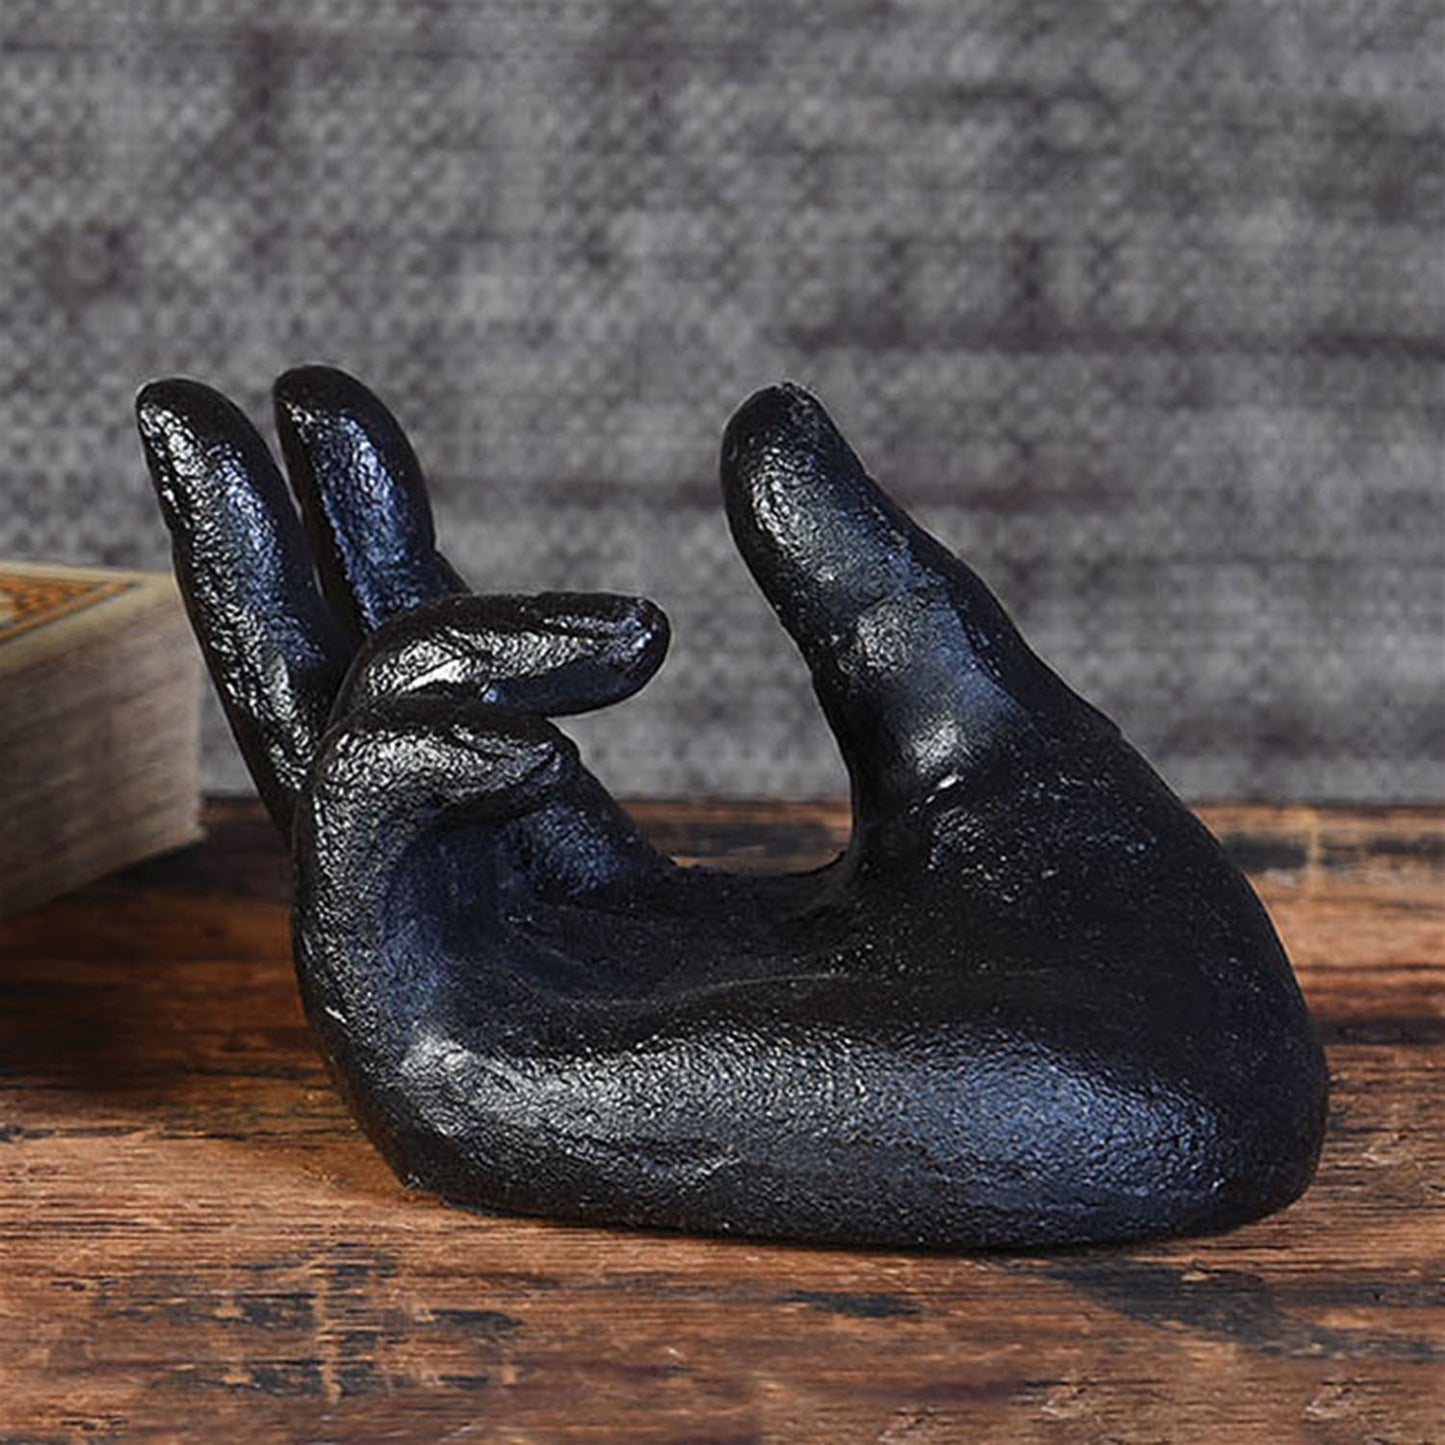 Black Cast Iron Hand 6Whiskey card holder paper weight desk accessory 